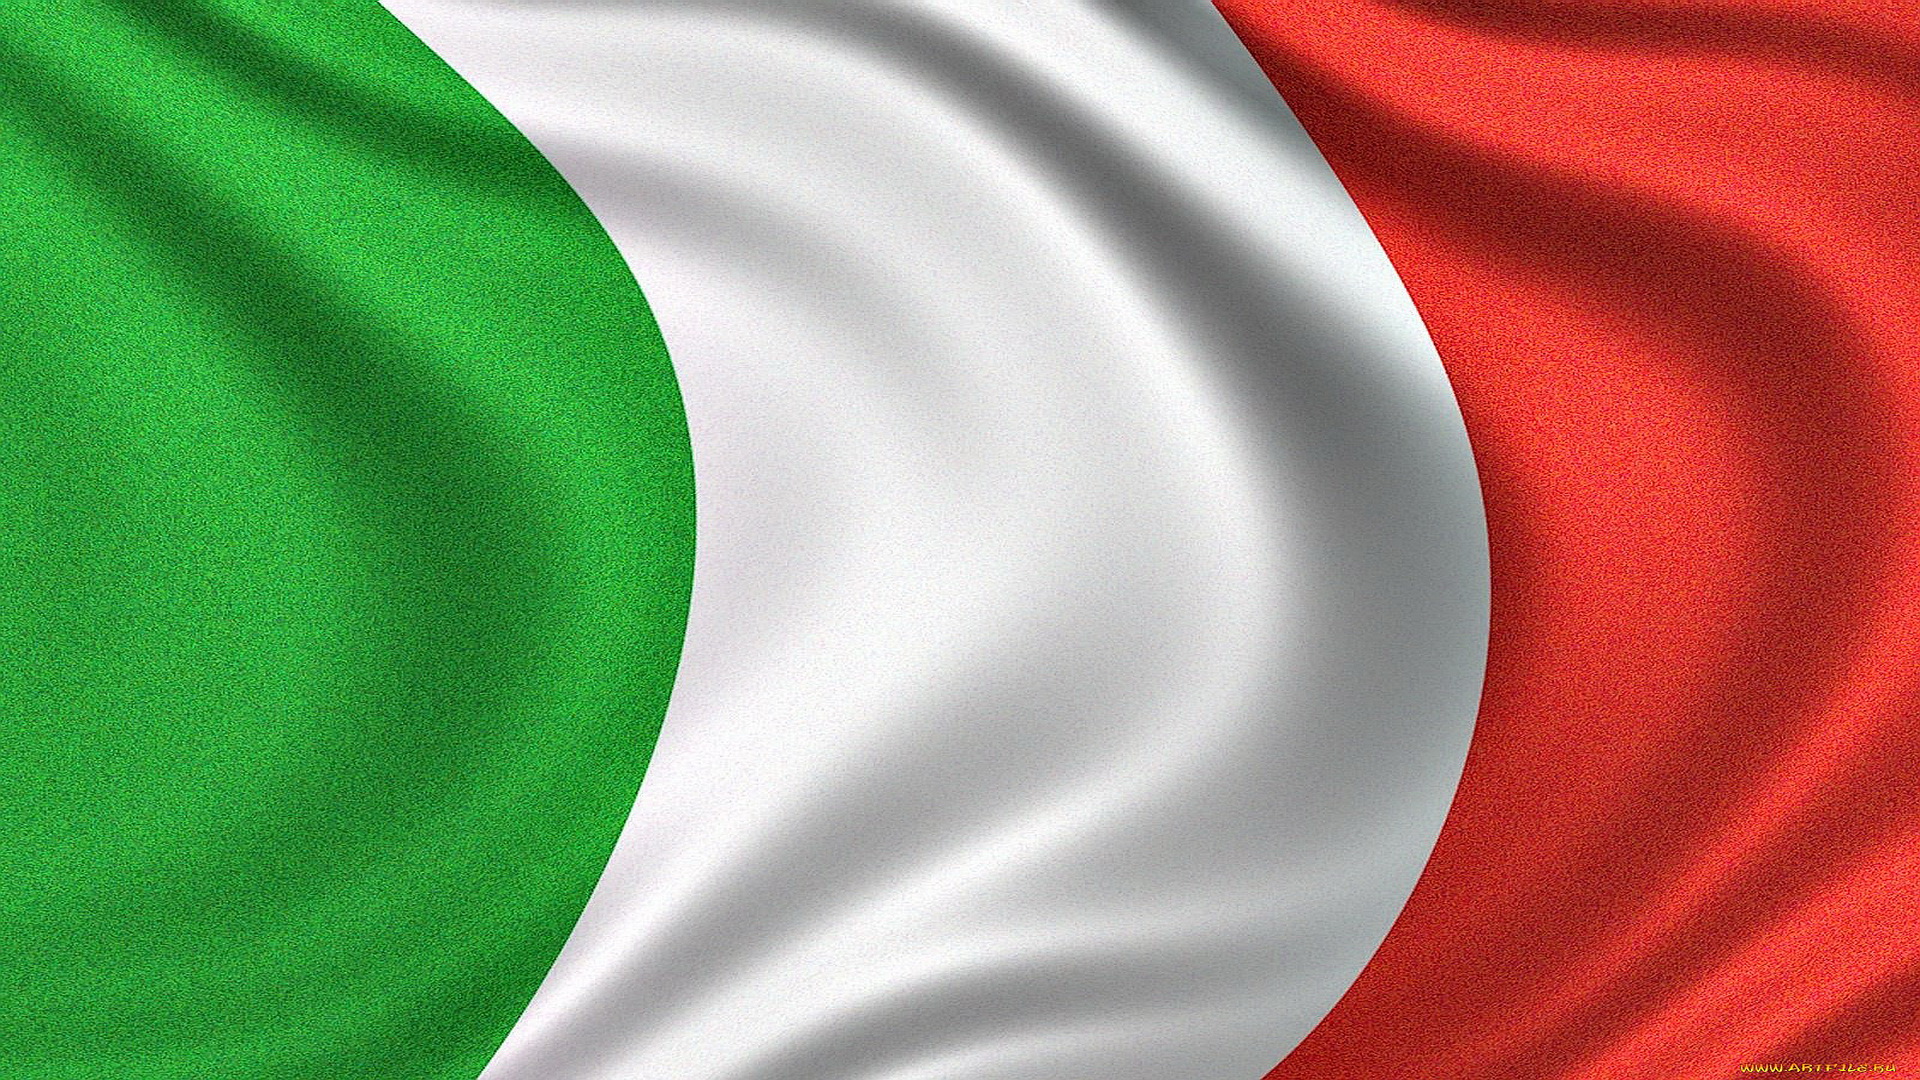 Italian Flag Images Free - ClipArt Best